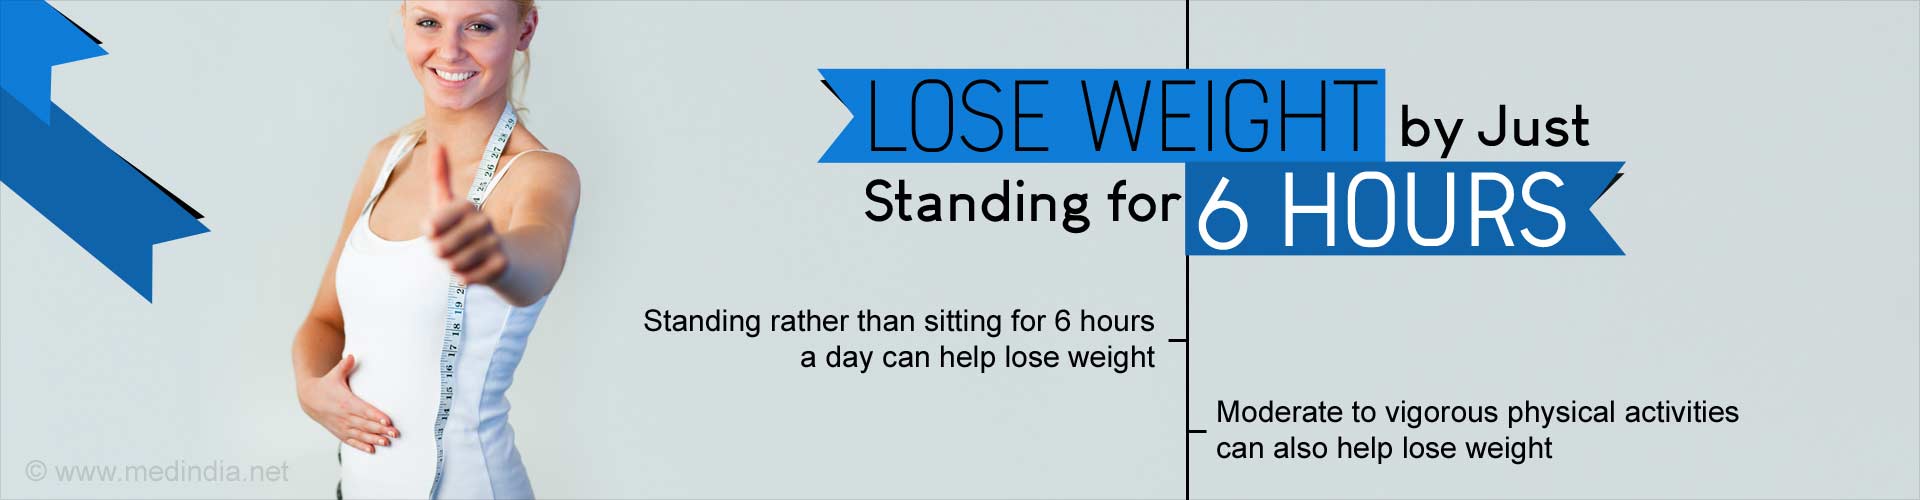 lose weight by just standing for 6 hours
- standing rather than sitting for 6 hours a day can help lose weight
- moderate to vigorous physical activities can also help lose weight
